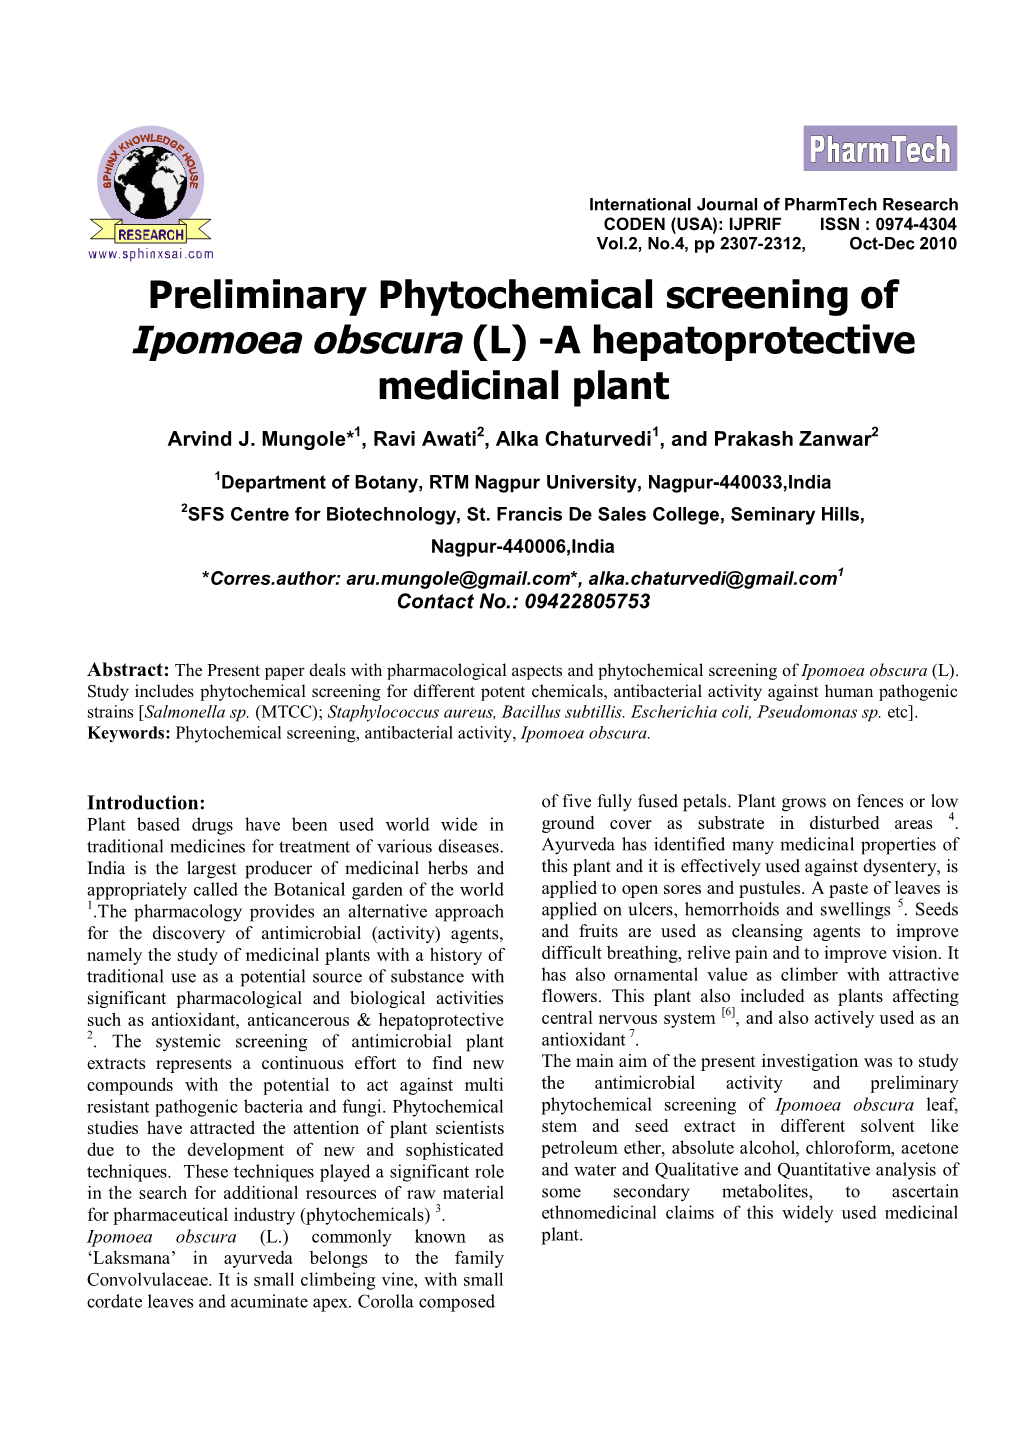 Preliminary Phytochemical Screening of Ipomoea Obscura (L) -A Hepatoprotective Medicinal Plant